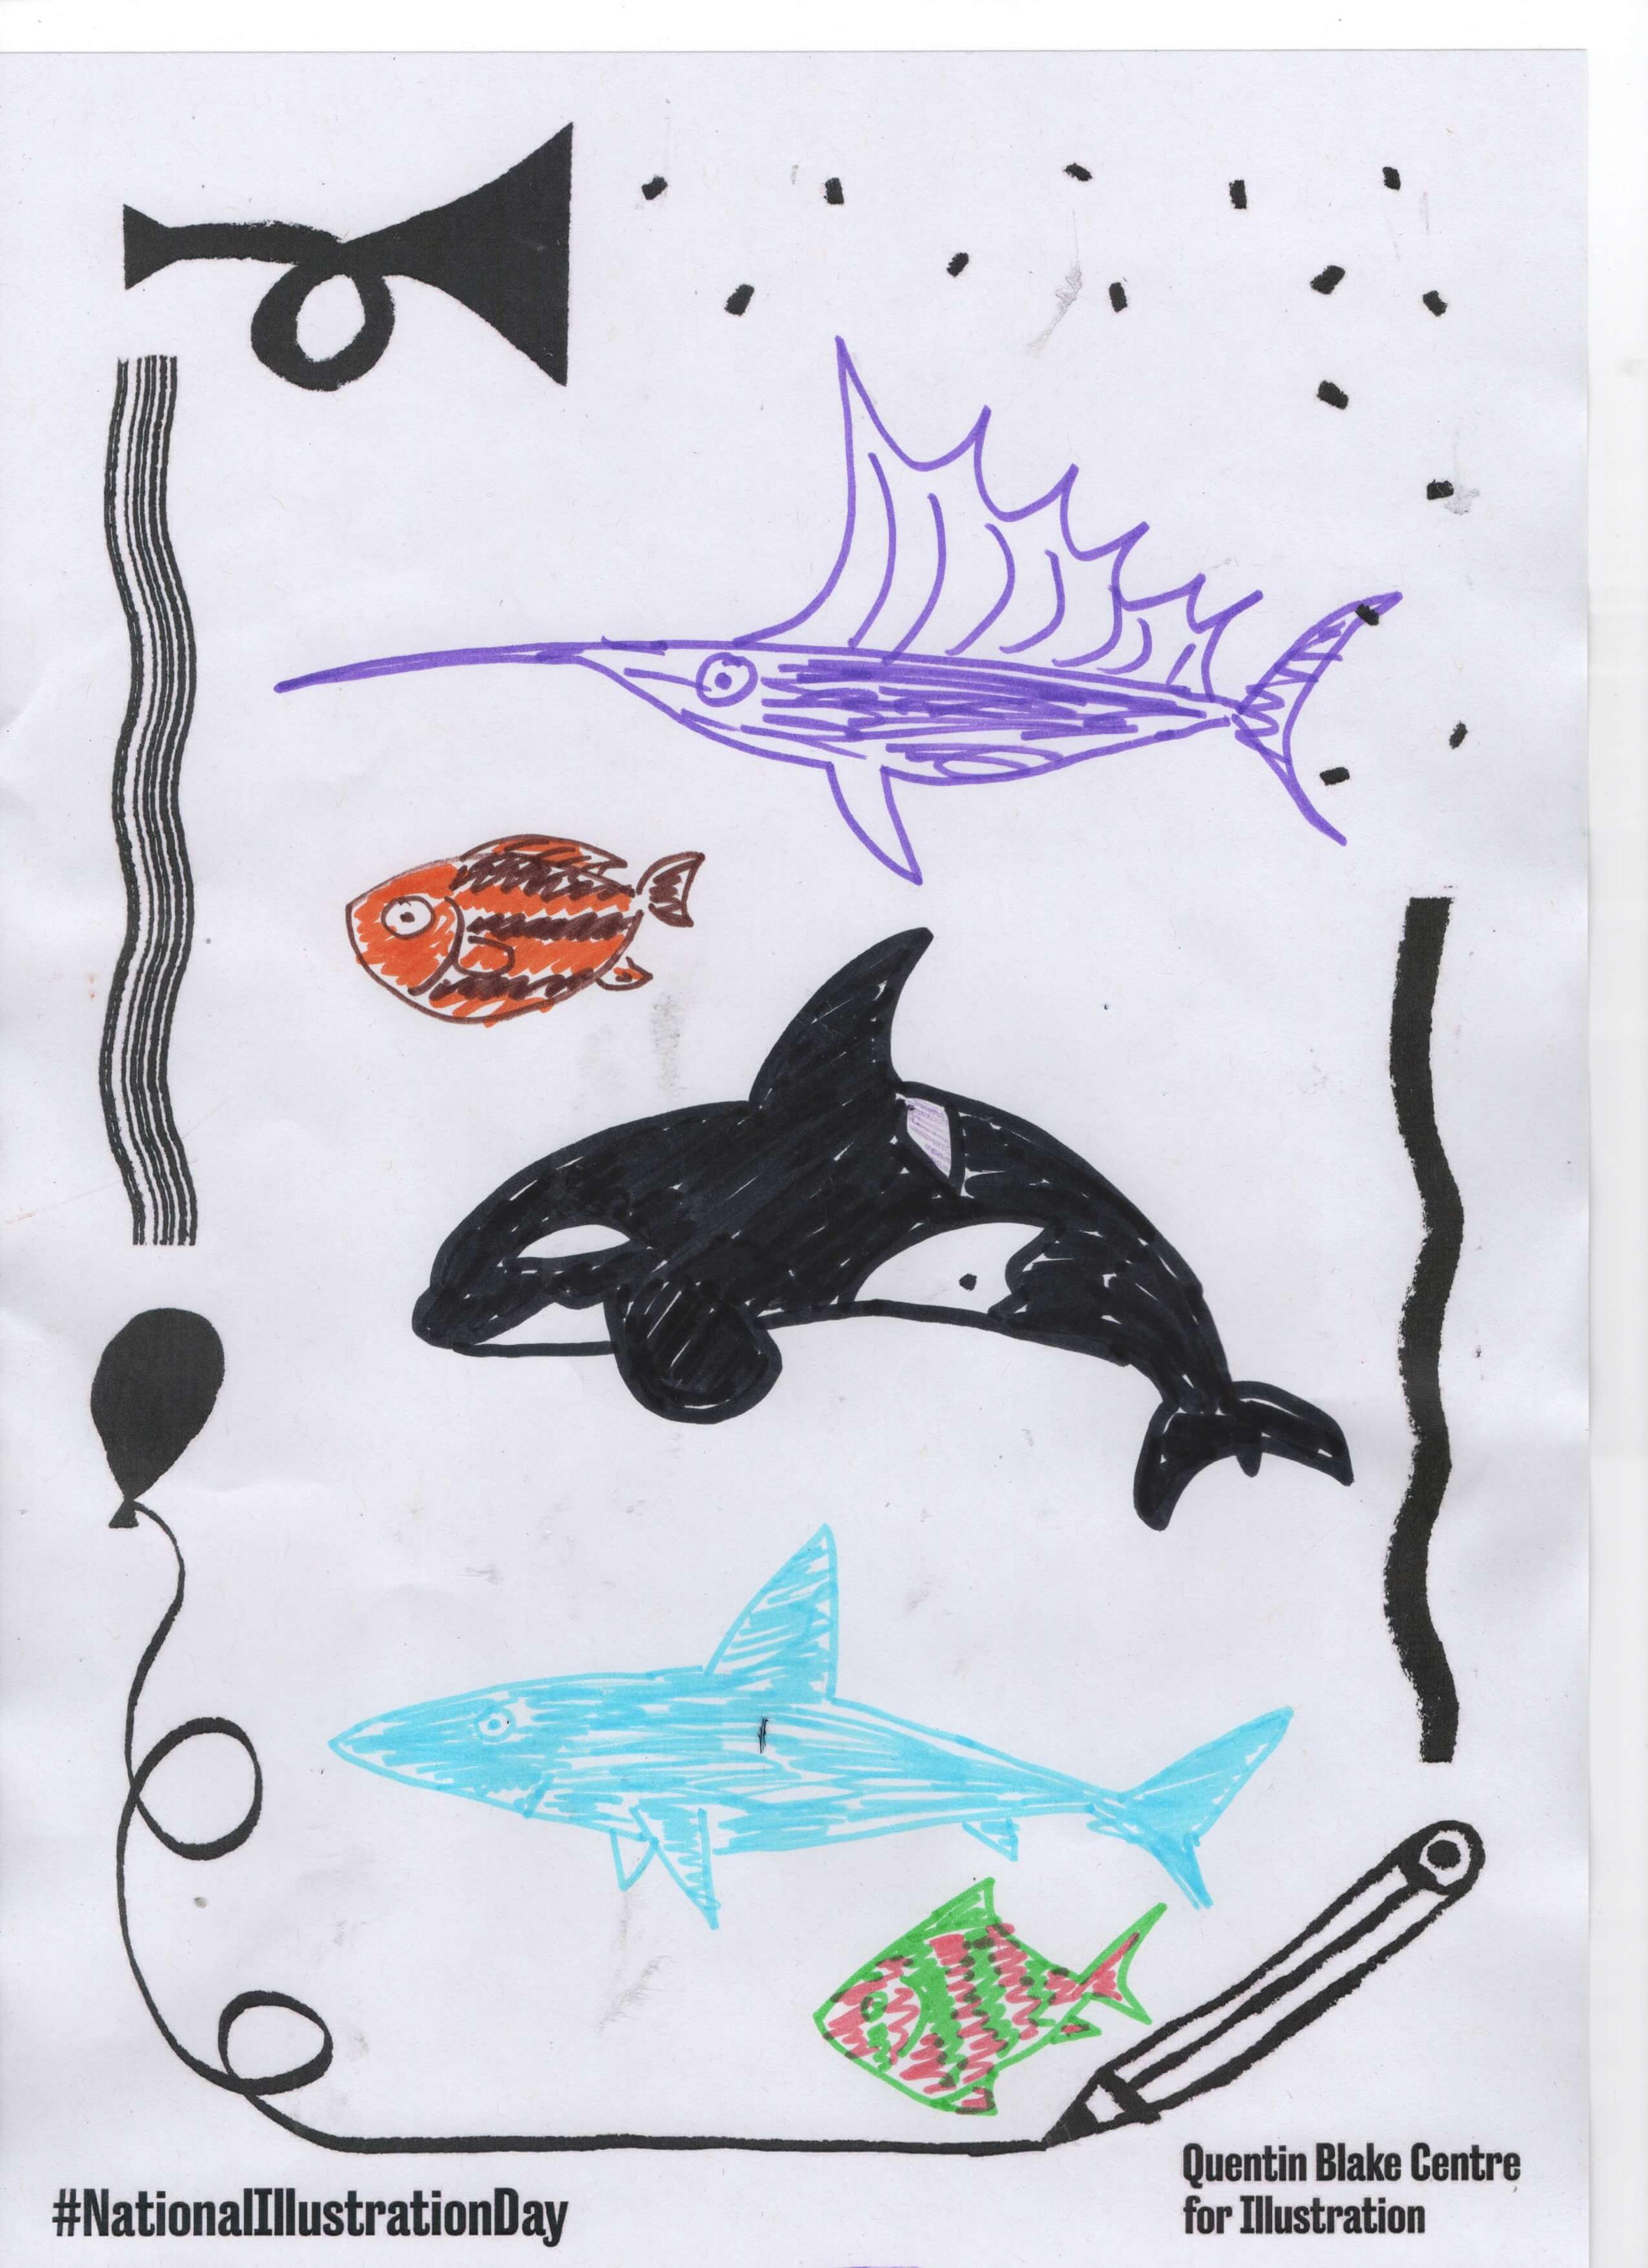 Illustration of different marine animals including fish, a swordfish, a shark and a killer whale